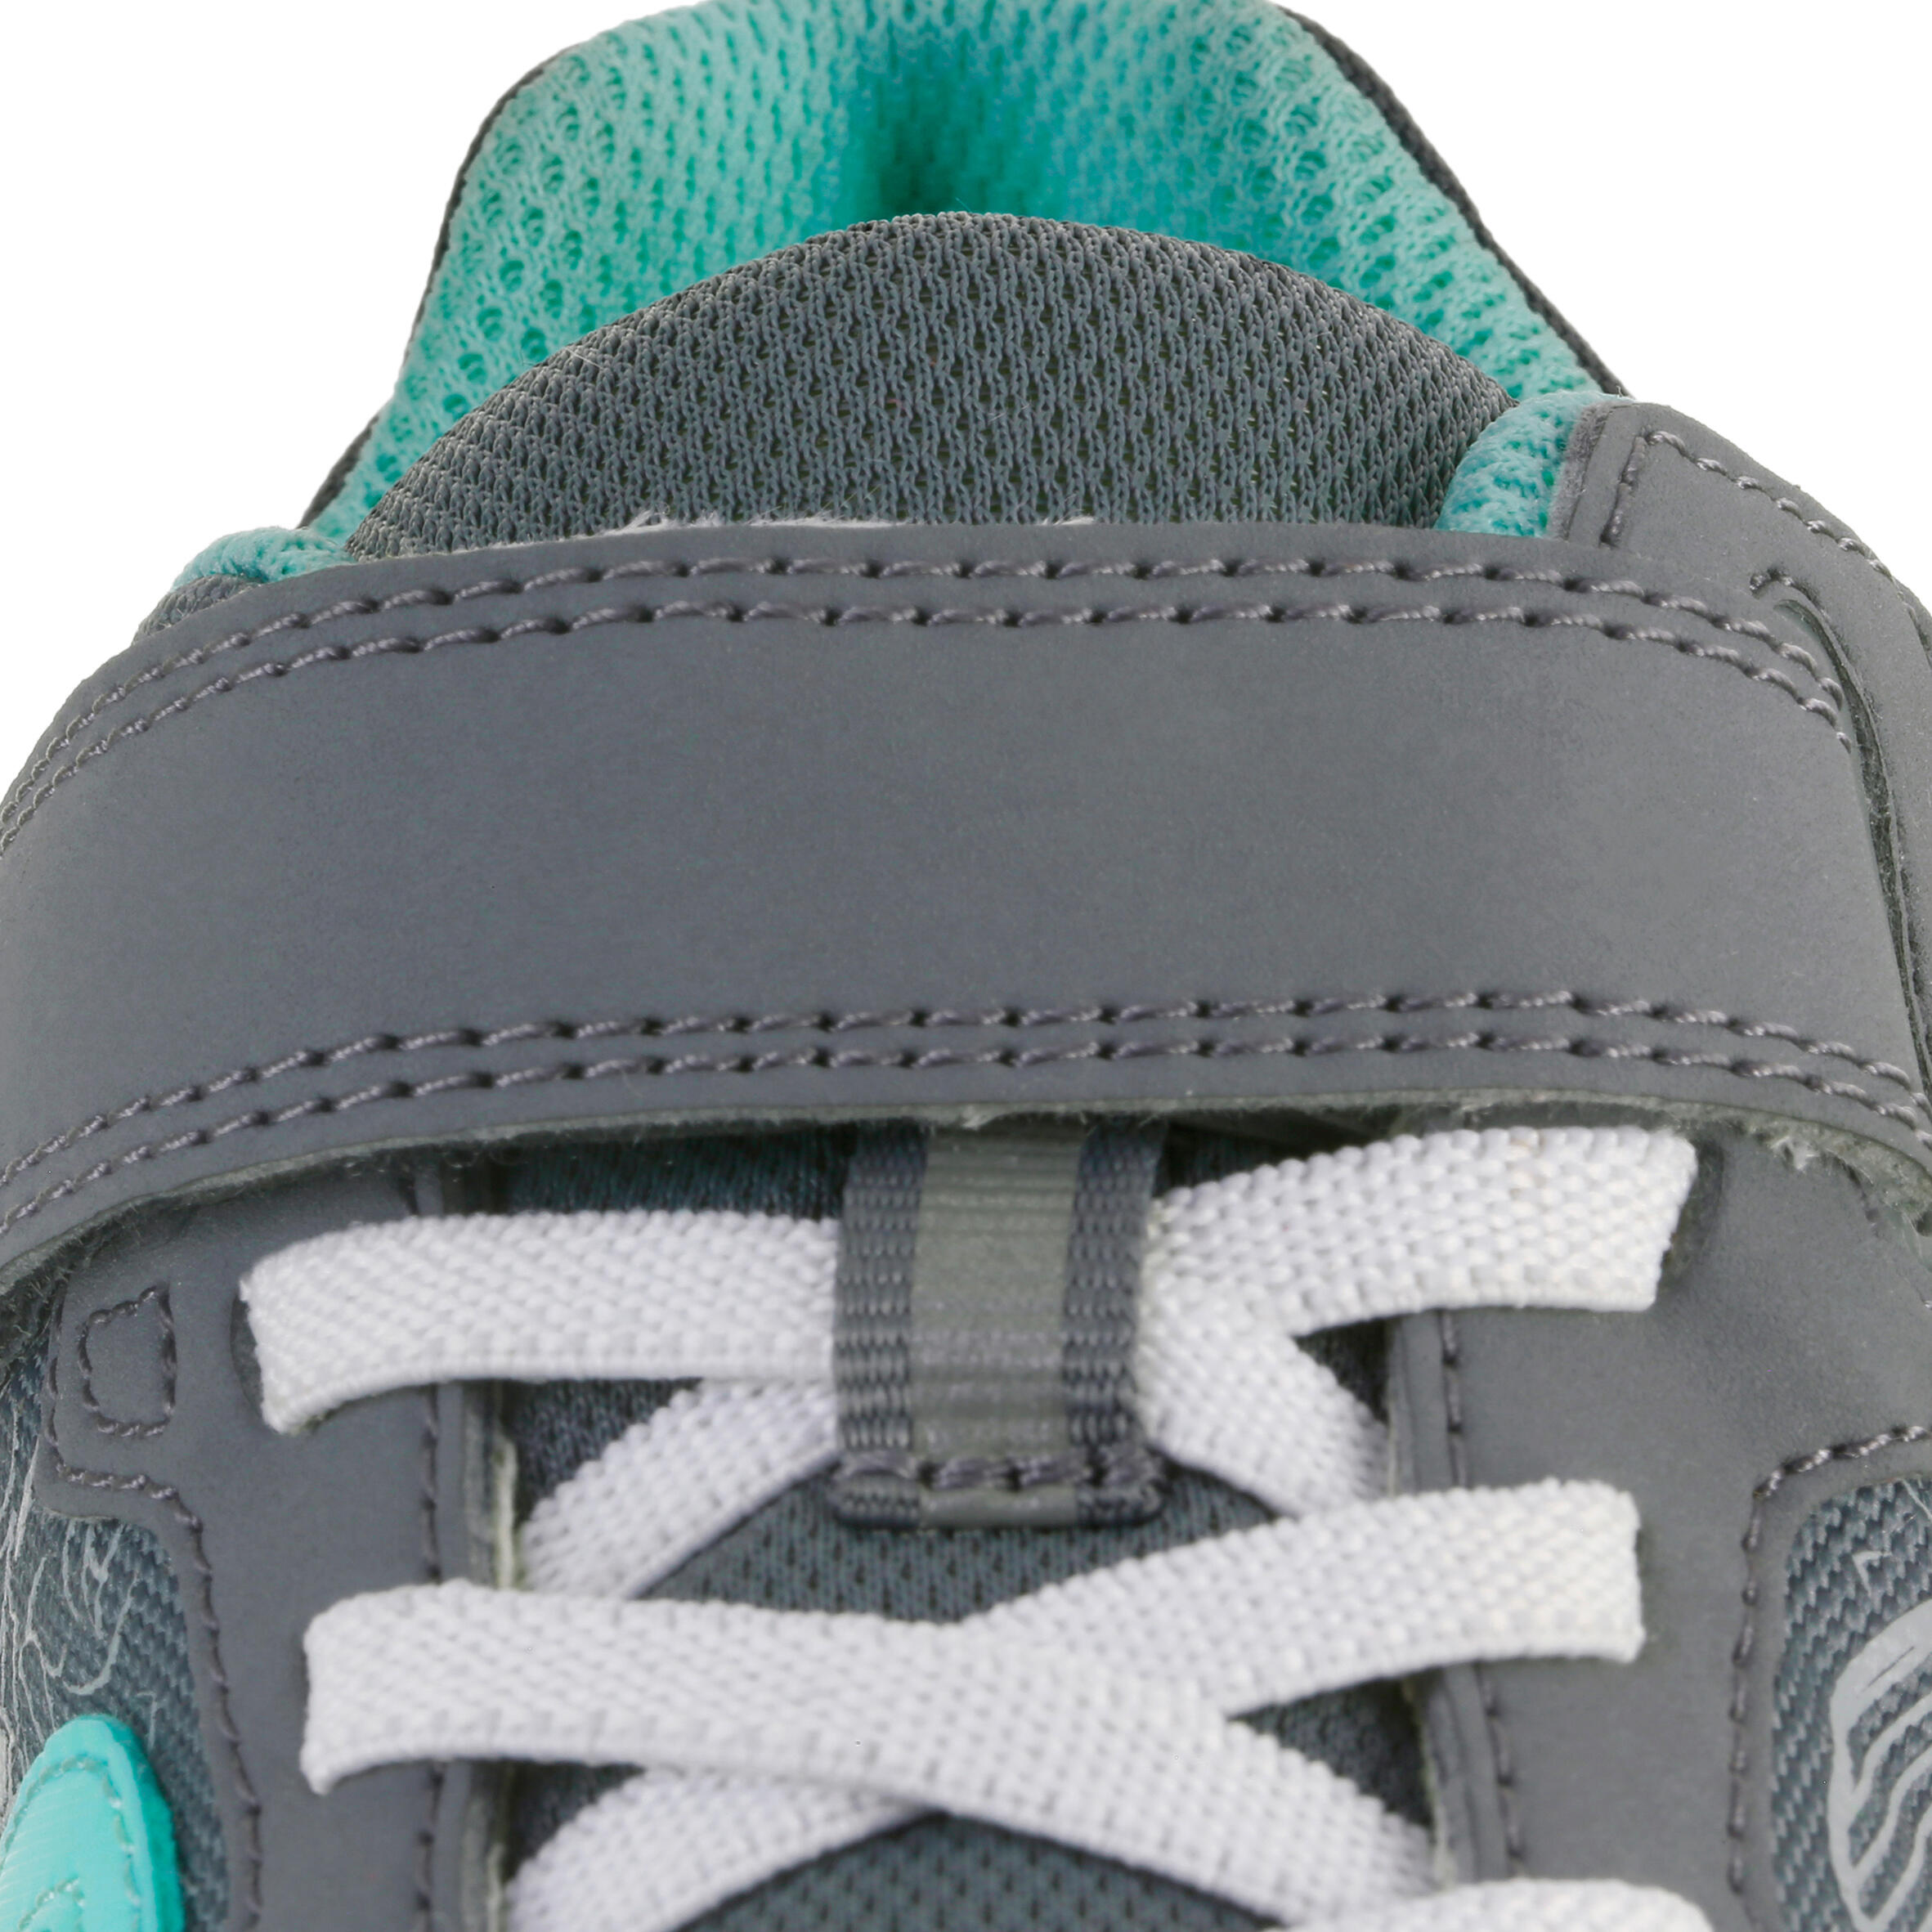 Soft 140 children's fitness walking shoes grey/turquoise 9/12